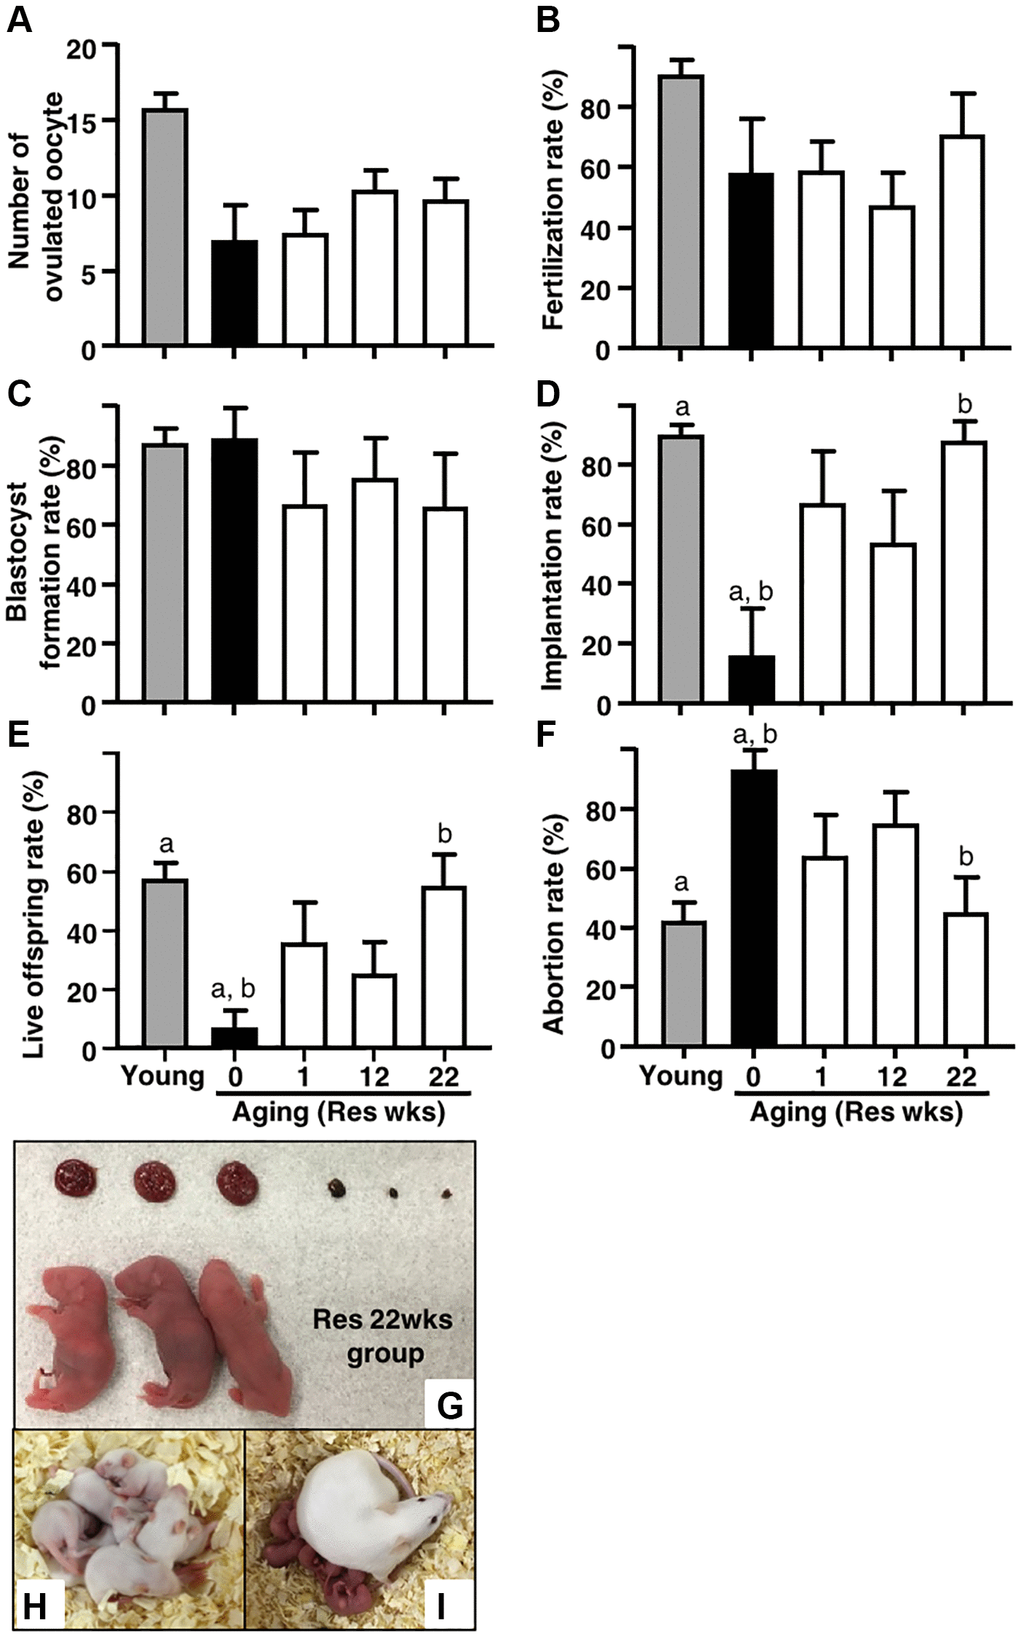 Effects of resveratrol treatment on fertility in aging mice. Ovulation was induced at proestrous stage after 47 weeks of resveratrol (Res) treatment by using hCG injection. At 15 hours after hCG administration, cumulus-oocyte complexes (COCs) were obtained from oviduct ampulla. COCs were inseminated with sperm collected from fertile male mice. At 16 hours after culture, 2-cell stage embryos were collected and allowed to develop to the blastocyst stage by additional 72 hours of culture. After embryo culture, blastocysts from each animal were transfer to independent recipient mouse. At 19 days after oocyte retrieval, Caesarian section was performed to count the number of implantation sites and live offspring. For young controls, ICR mice at 6 weeks of age were used. (A) Number of ovulated oocytes. The number of ovulated oocytes was determined by removal of cumulus cells surrounding oocytes after insemination under the stereomicroscope (n = 8 animals). (B) Fertilization rate (2-cell stage embryos/ovulated oocytes) (n = 6*–8 animals, 33–115.2-cell stage embryos per groups). *, two mice in control group and one mouse in Res 22 weeks group did not ovulate. (C) Blastocyst formation rate (blastocysts/2-cell stage embryos) (n = 4*–8 animals, 28–105 blastocysts per groups). *, oocytes retrieved from two mice in each control and Res 12 and 22 weeks group did not fertilize. (D) Implantation rate (implanted blastocysts/transferred blastocysts) (n = 4–7* animals, 7–95 implanted blastocysts per groups). *, 2-cell stage embryos derived from one mouse in each Res 1 and 22 weeks group were arrested to develop prior blastocyst stage. (E) live offspring rate (live offspring/transferred blastocysts) (n = 4–7 animals, 3–61 live offspring per groups). (F) abortion rate (1- live offspring/transferred blastocysts). (G) representative images of live offspring and placentas from Res 22 weeks group. After Caesarian section, the offspring were nursed by foster mothers to evaluate their healthiness and mated at 8 weeks of age to confirm their fertility. (H) the offspring at 10 days after Caesarian section, (I) the offspring with pups. Bars represent means ± SE. a, b p 